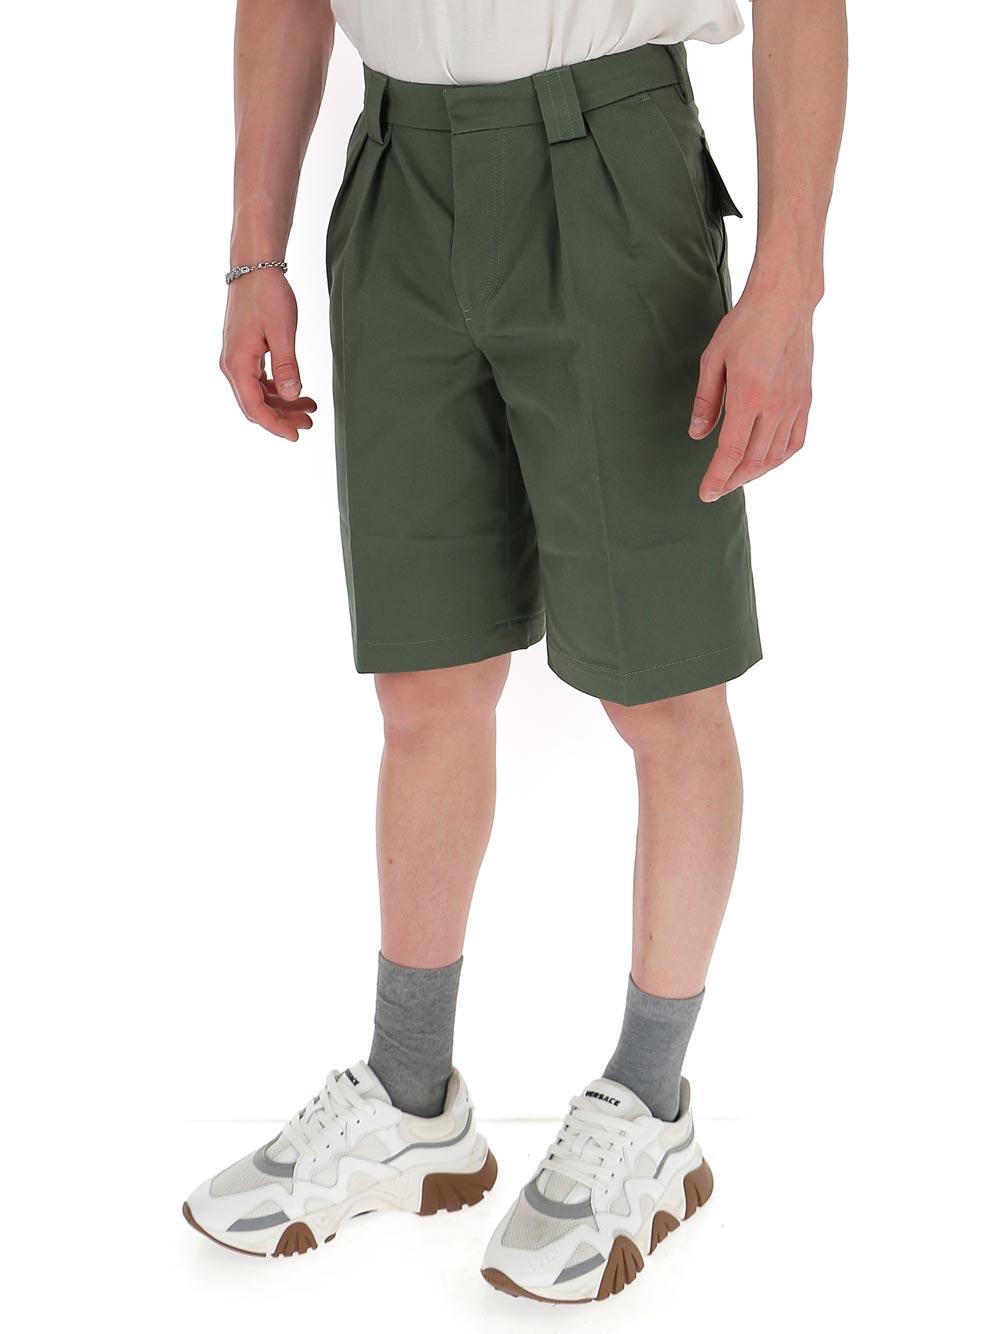 Jacquemus Cotton Pleated Shorts in Green for Men - Lyst